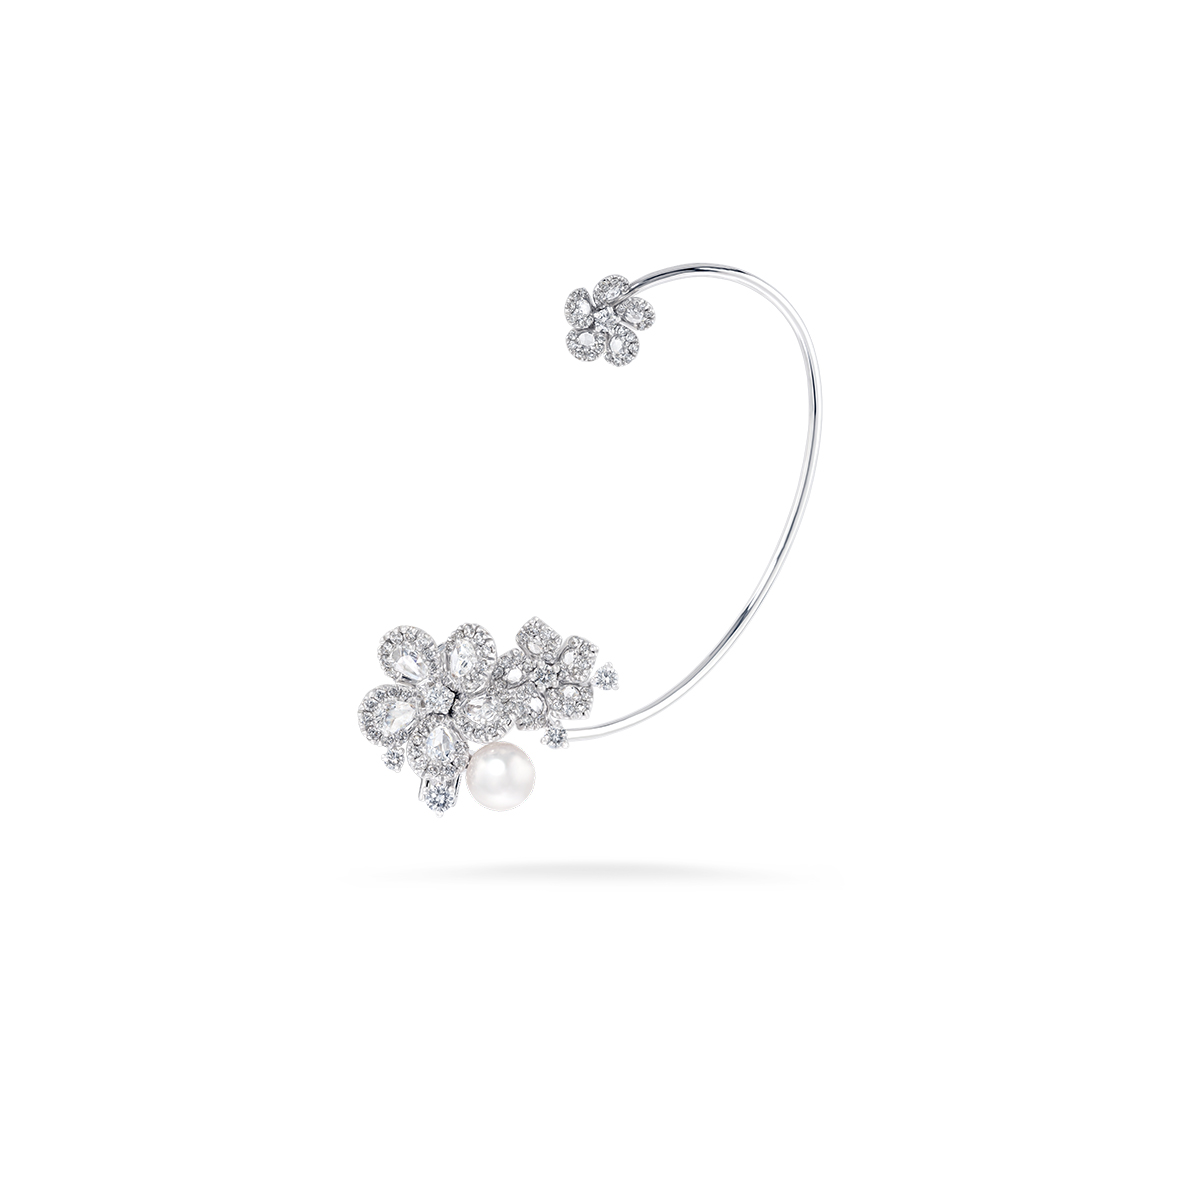 Diamond and white gold bracelet half open with flowers on the edges